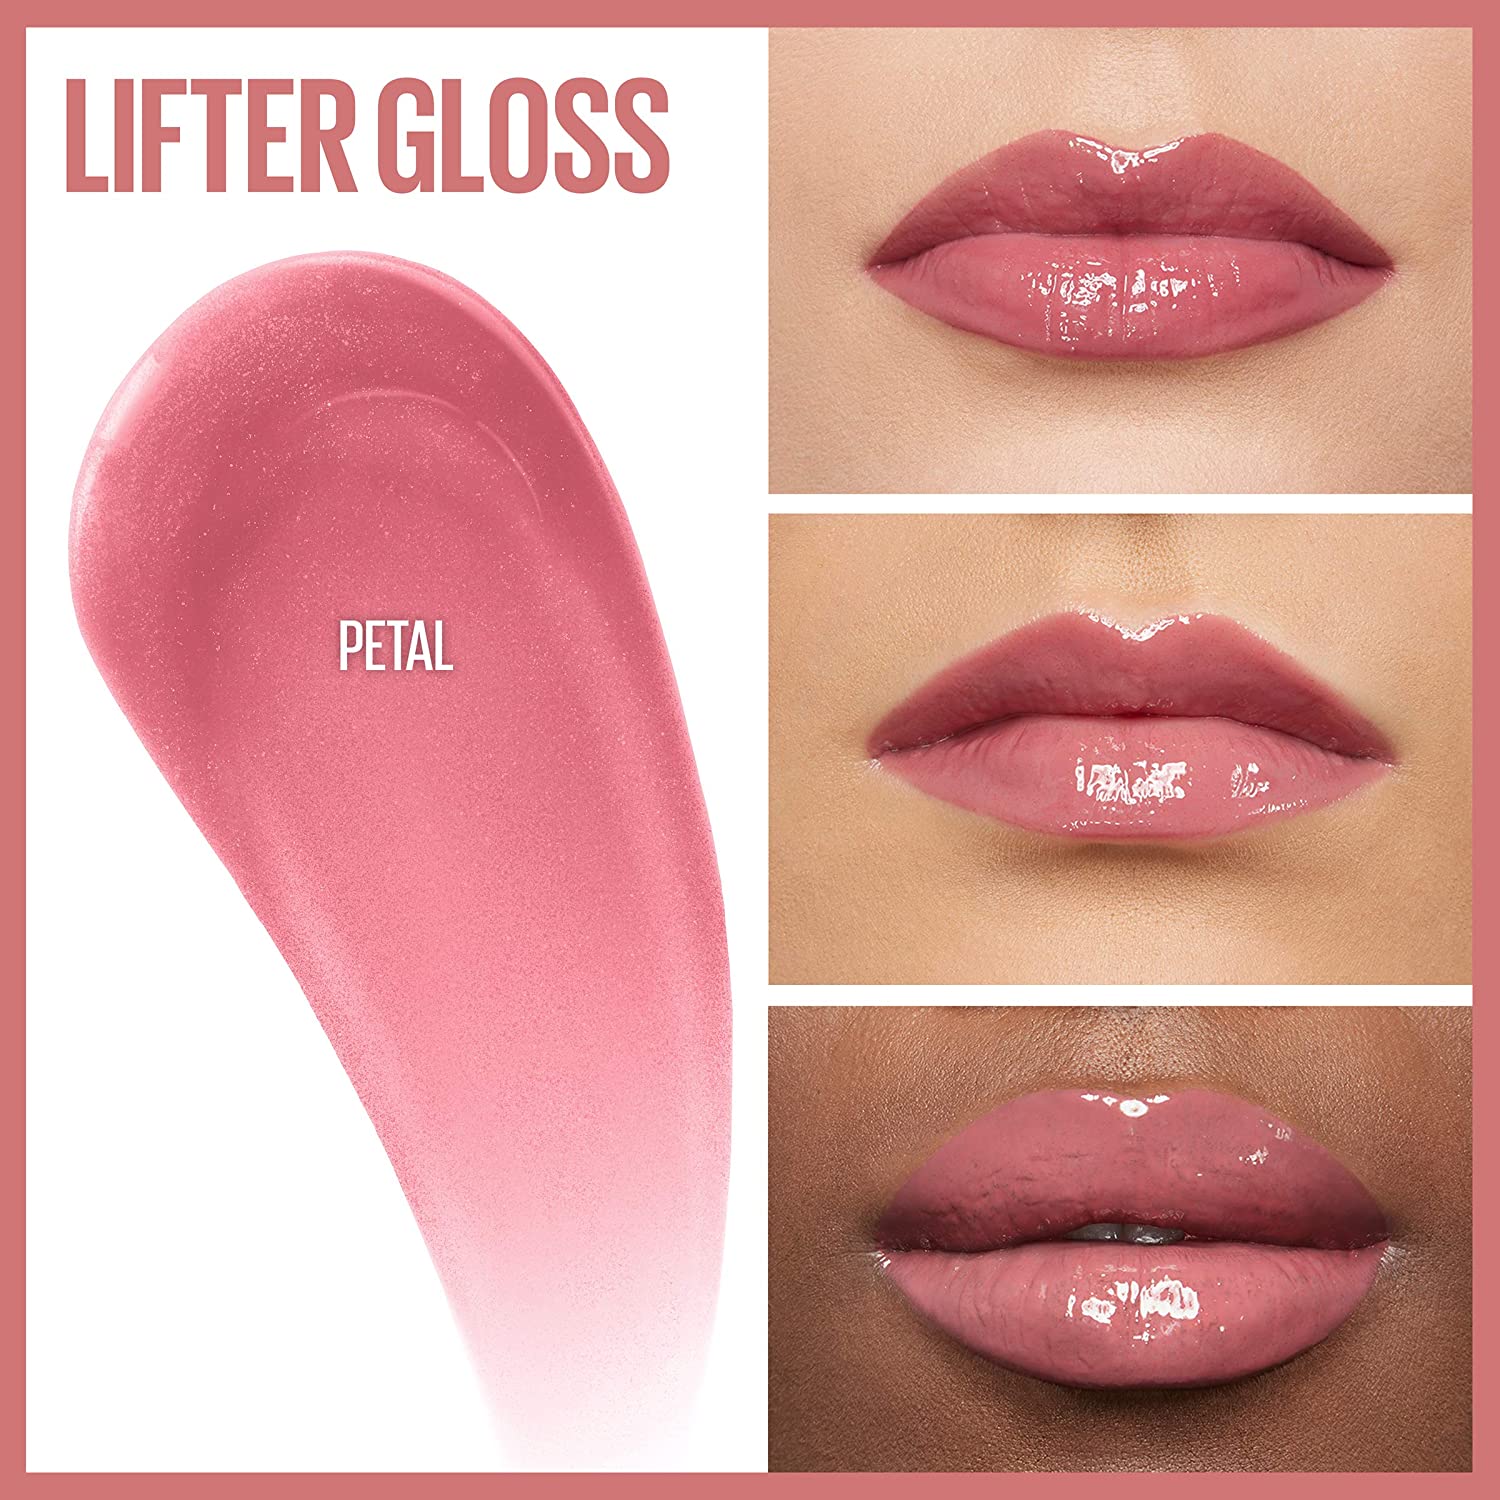 Lifter Gloss Hydrating Lip Gloss with Hyaluronic Acid - 005 Petal RIOS